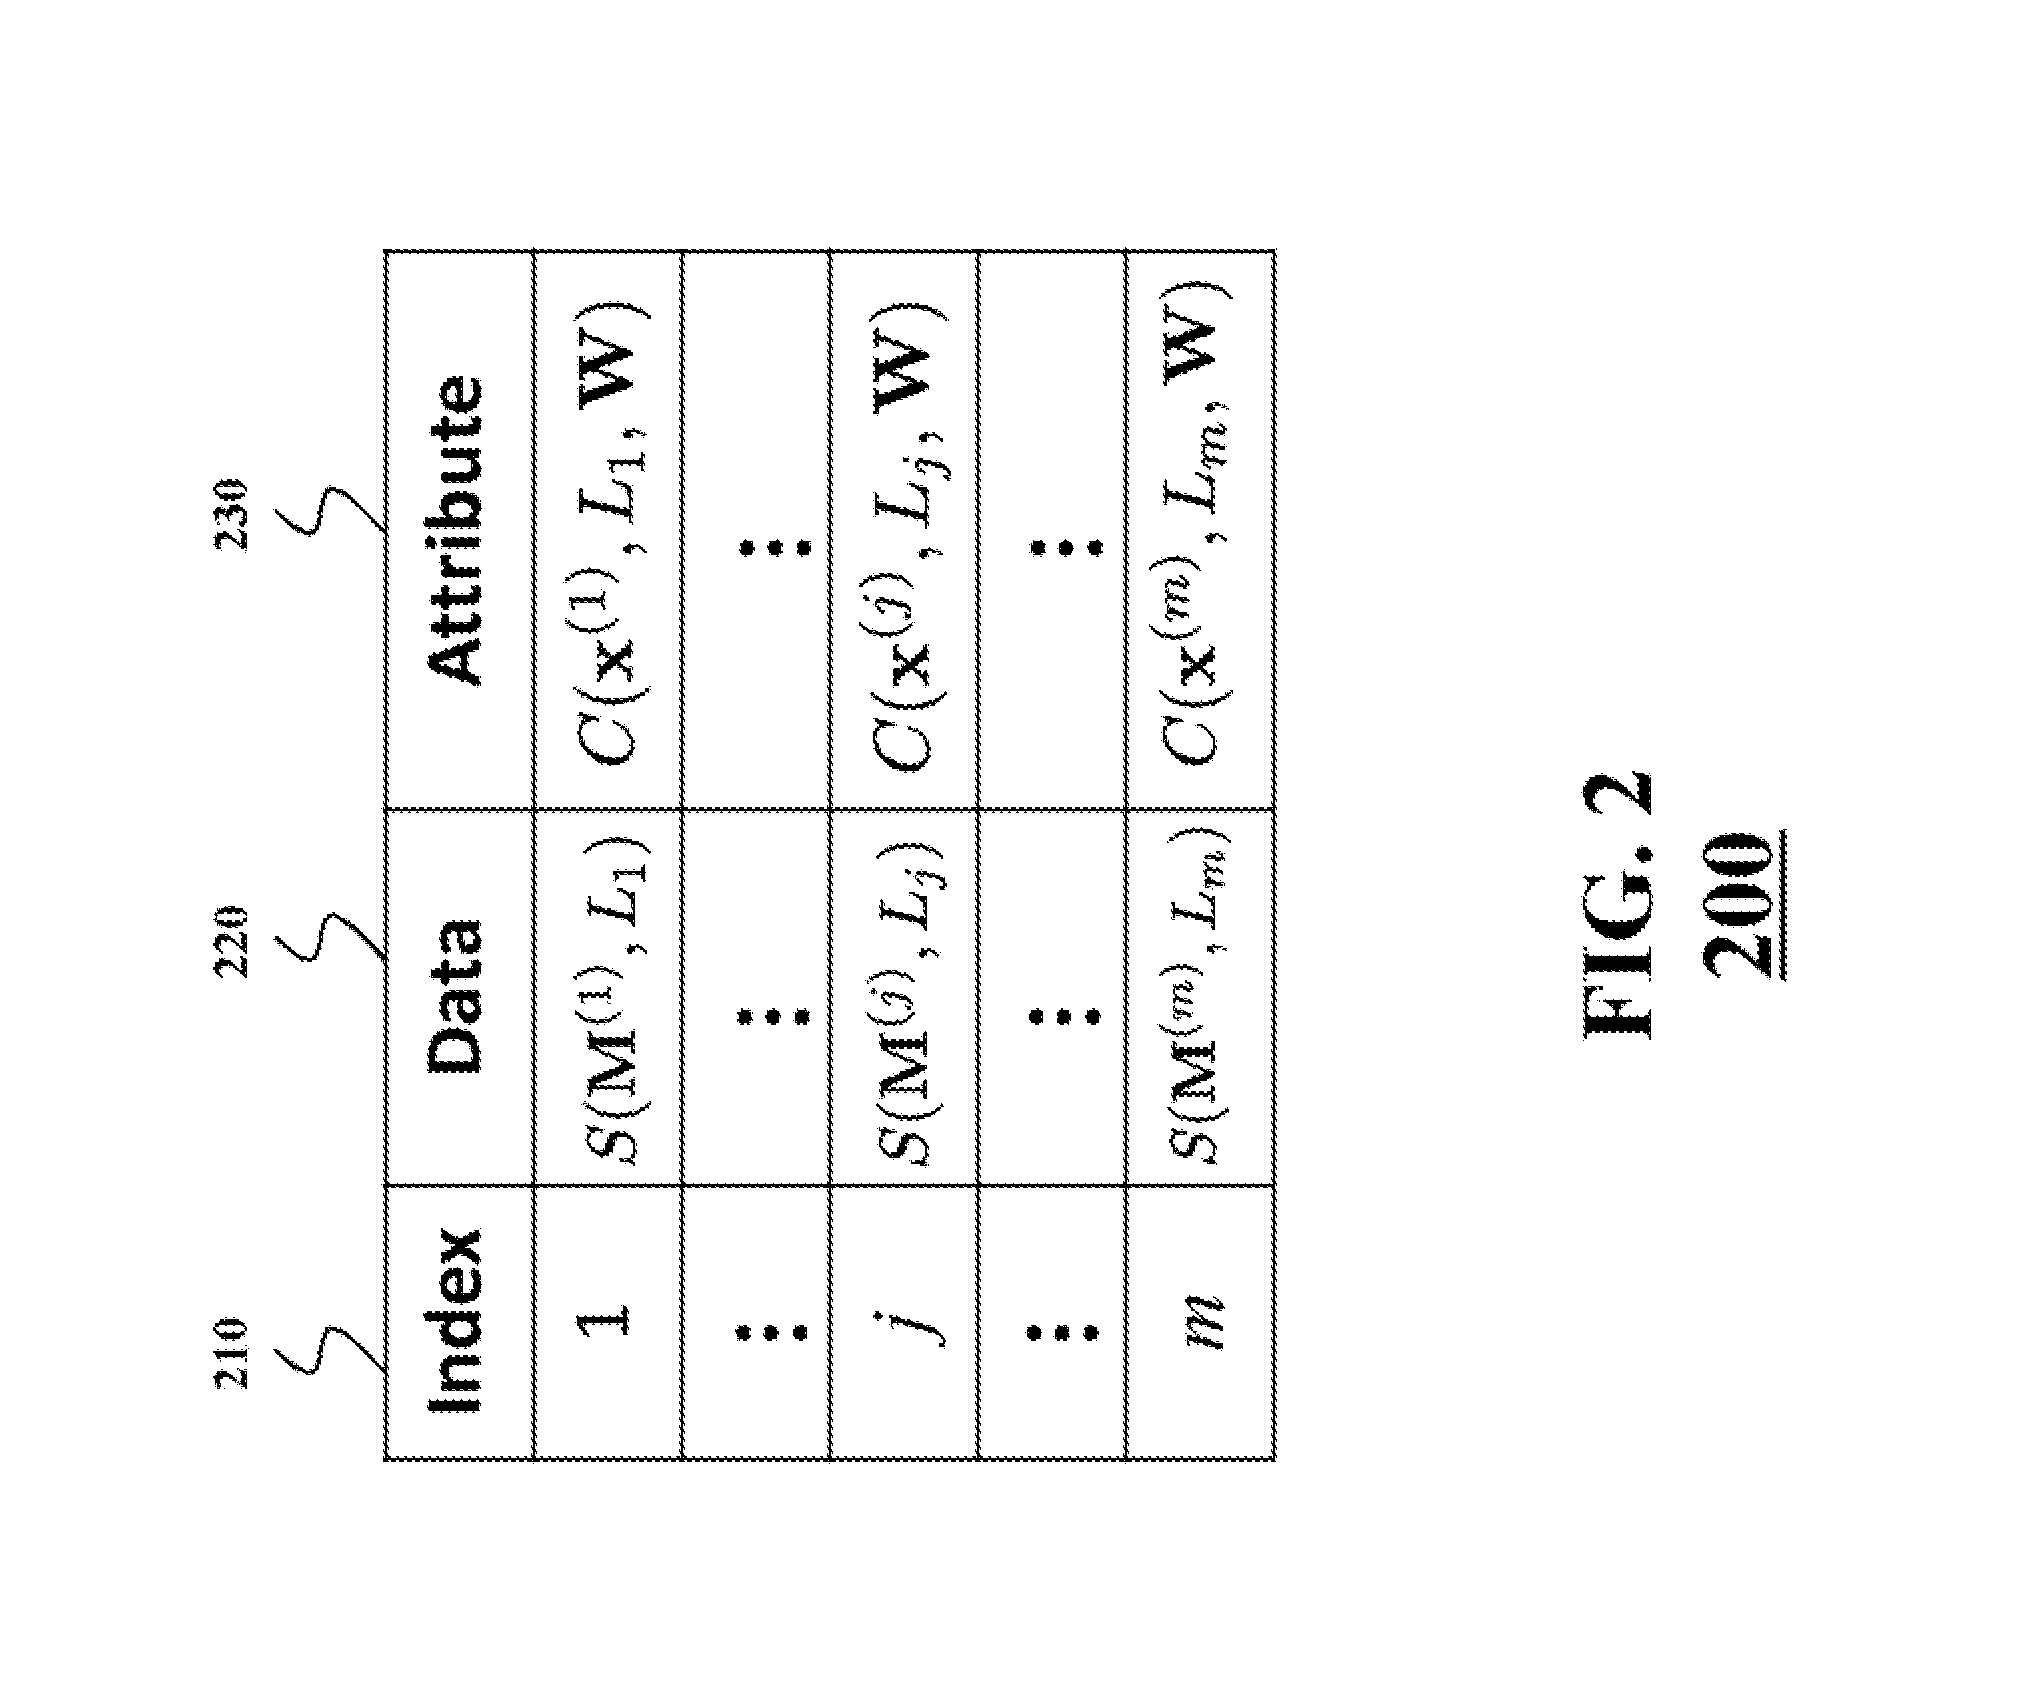 Method for Querying Data in Privacy Preserving Manner Using Attributes